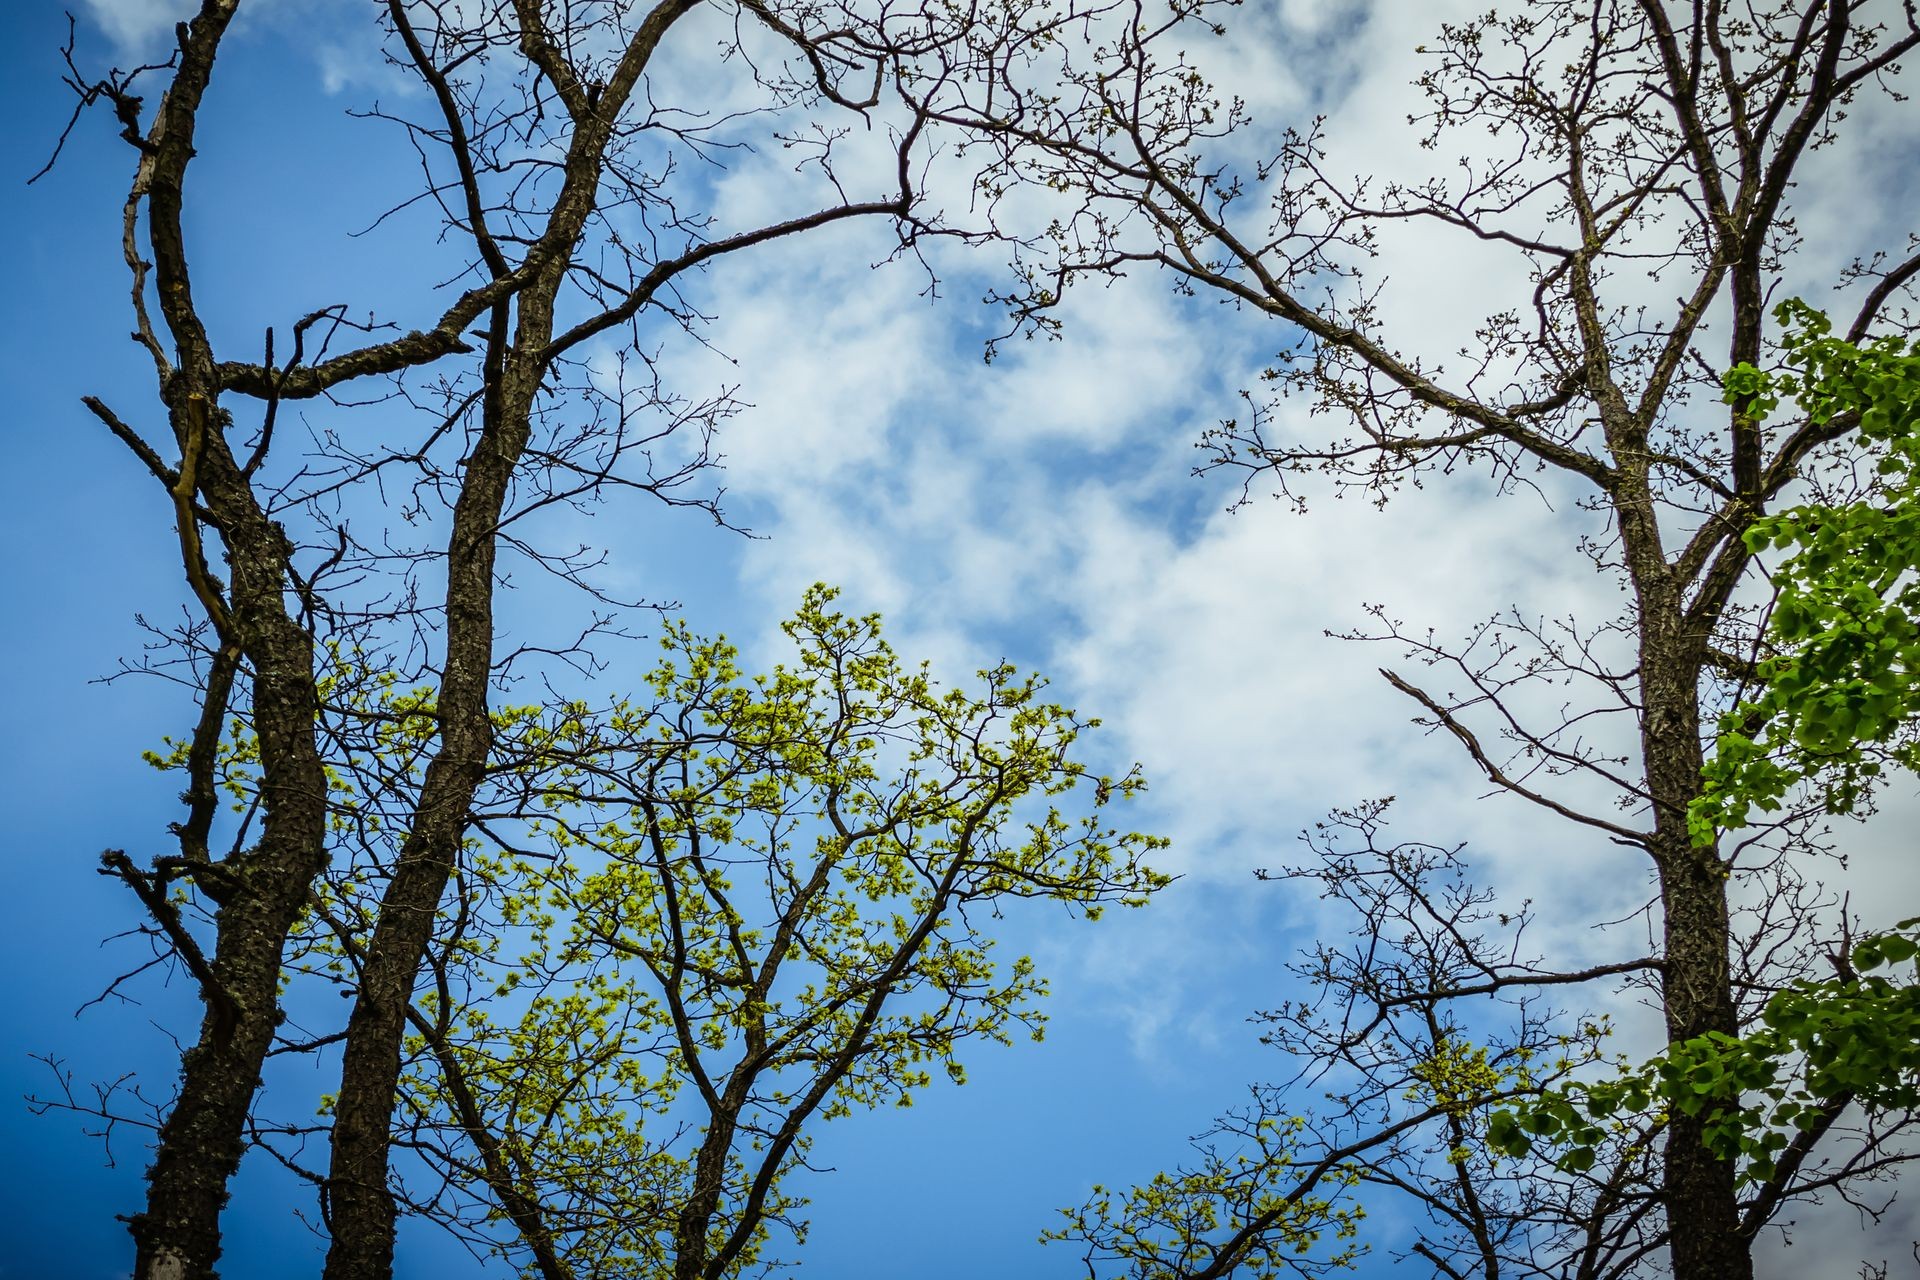 Trees of branches with dark and light green leaves on blue sky. Branch of trees on the blue sky. Many branches of a tree on a blue sky with clouds. Blue clear sky in background. Spring forest.